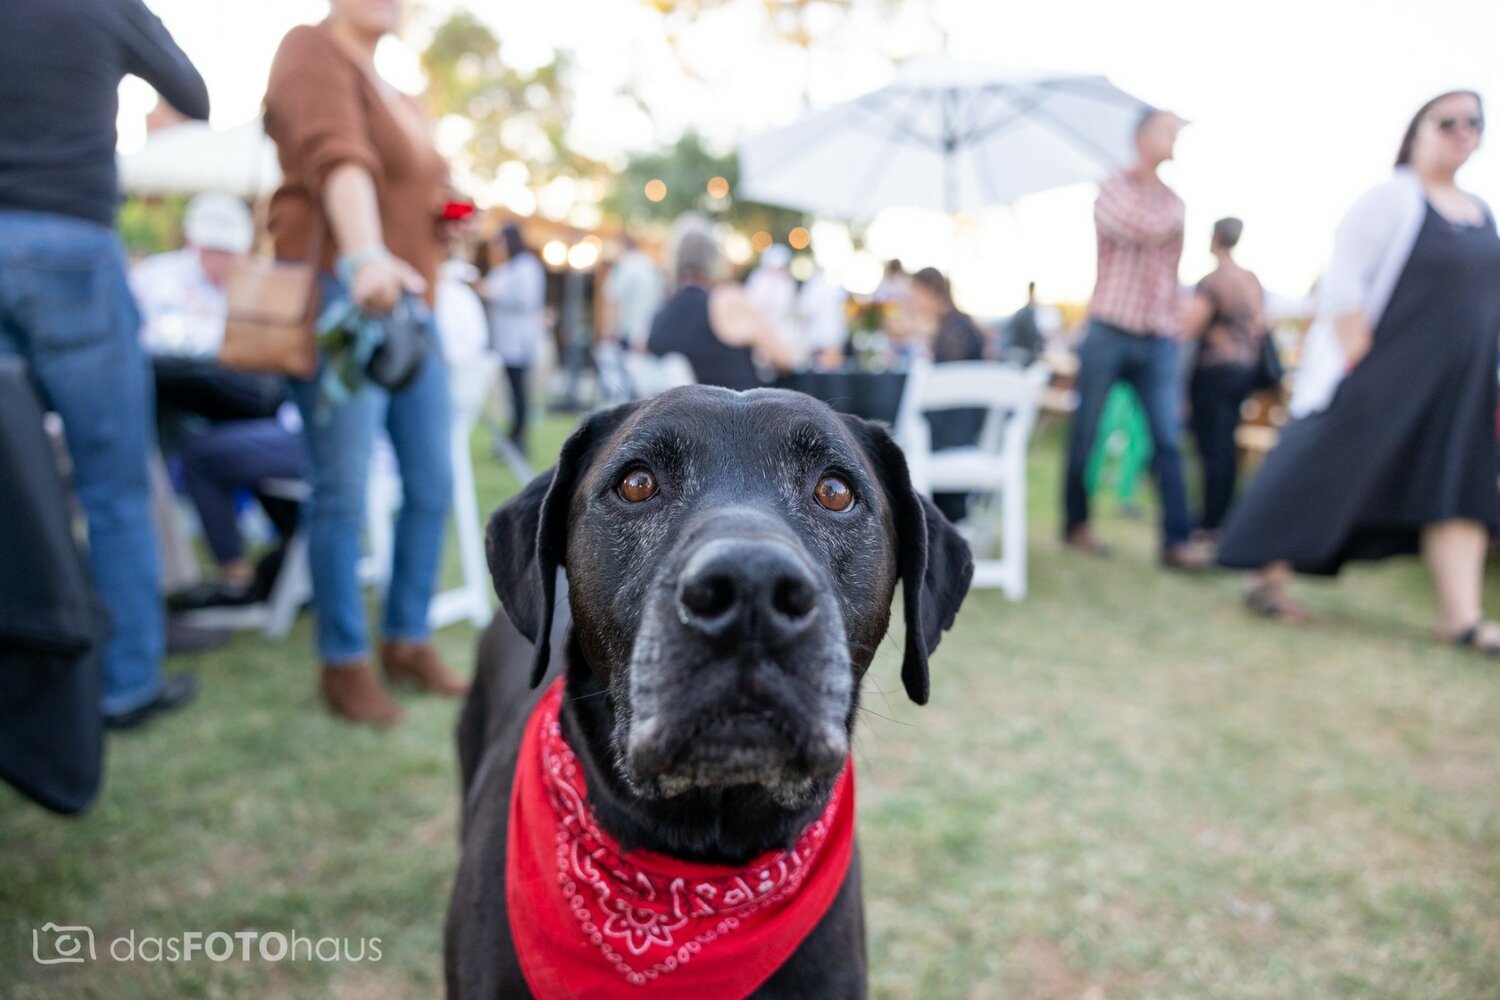 Since 1999, DLRR’s efforts have saved more than 6,000 displaced Labs throughout Arizona. The nonprofit’s rescue work relies solely on fundraising, donations, and volunteer work. Sponsorships and donations for the annual Corks and Collars event are an important key to the organization’s success.